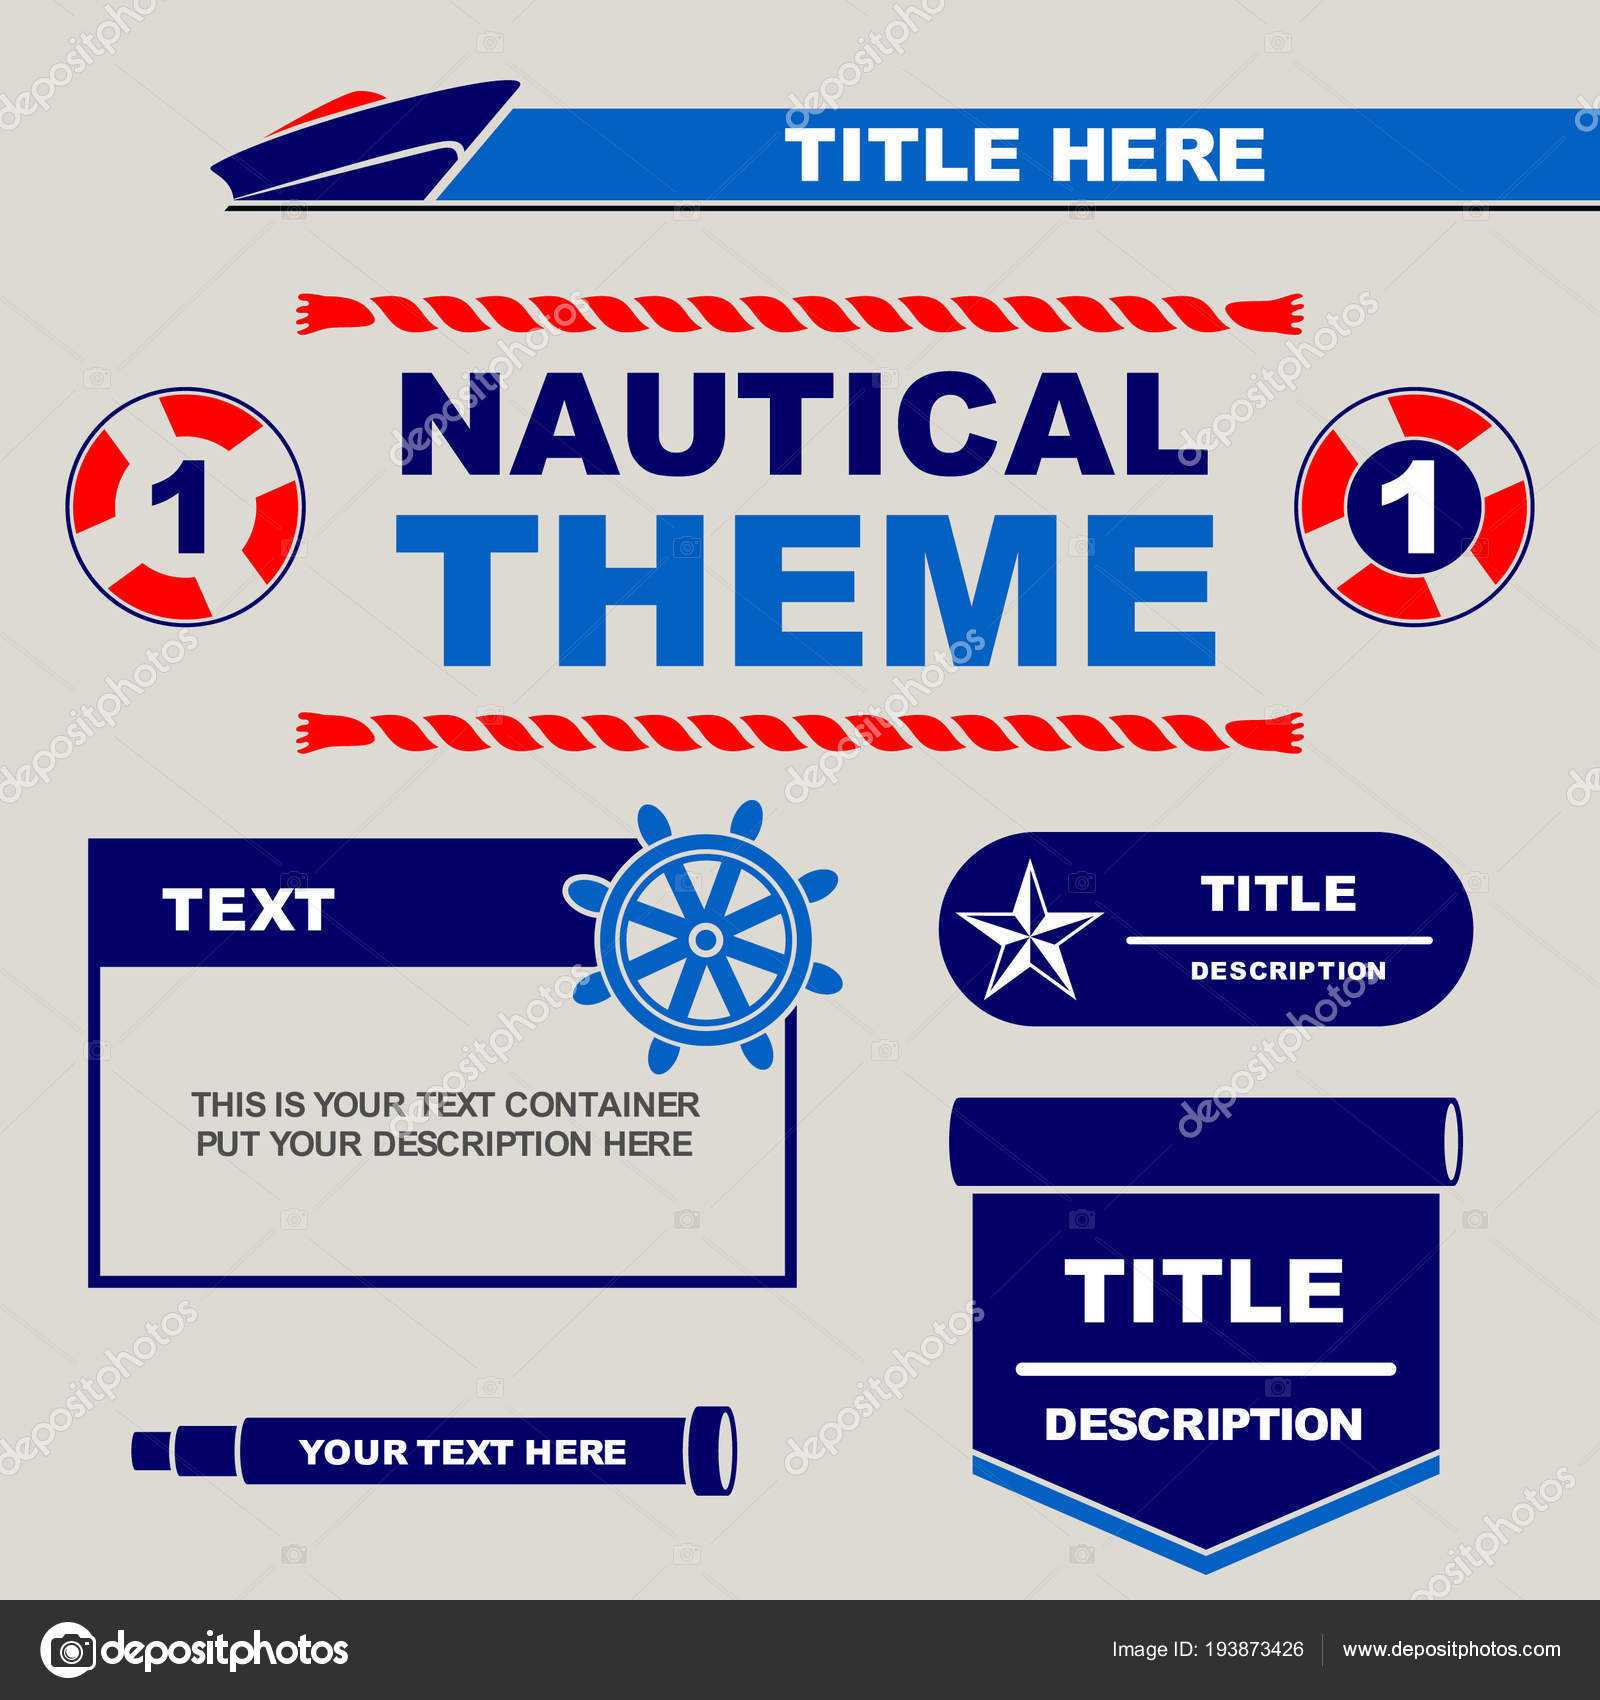 Nautical Theme Design Template You Can Use Flyers Banner With Nautical Banner Template